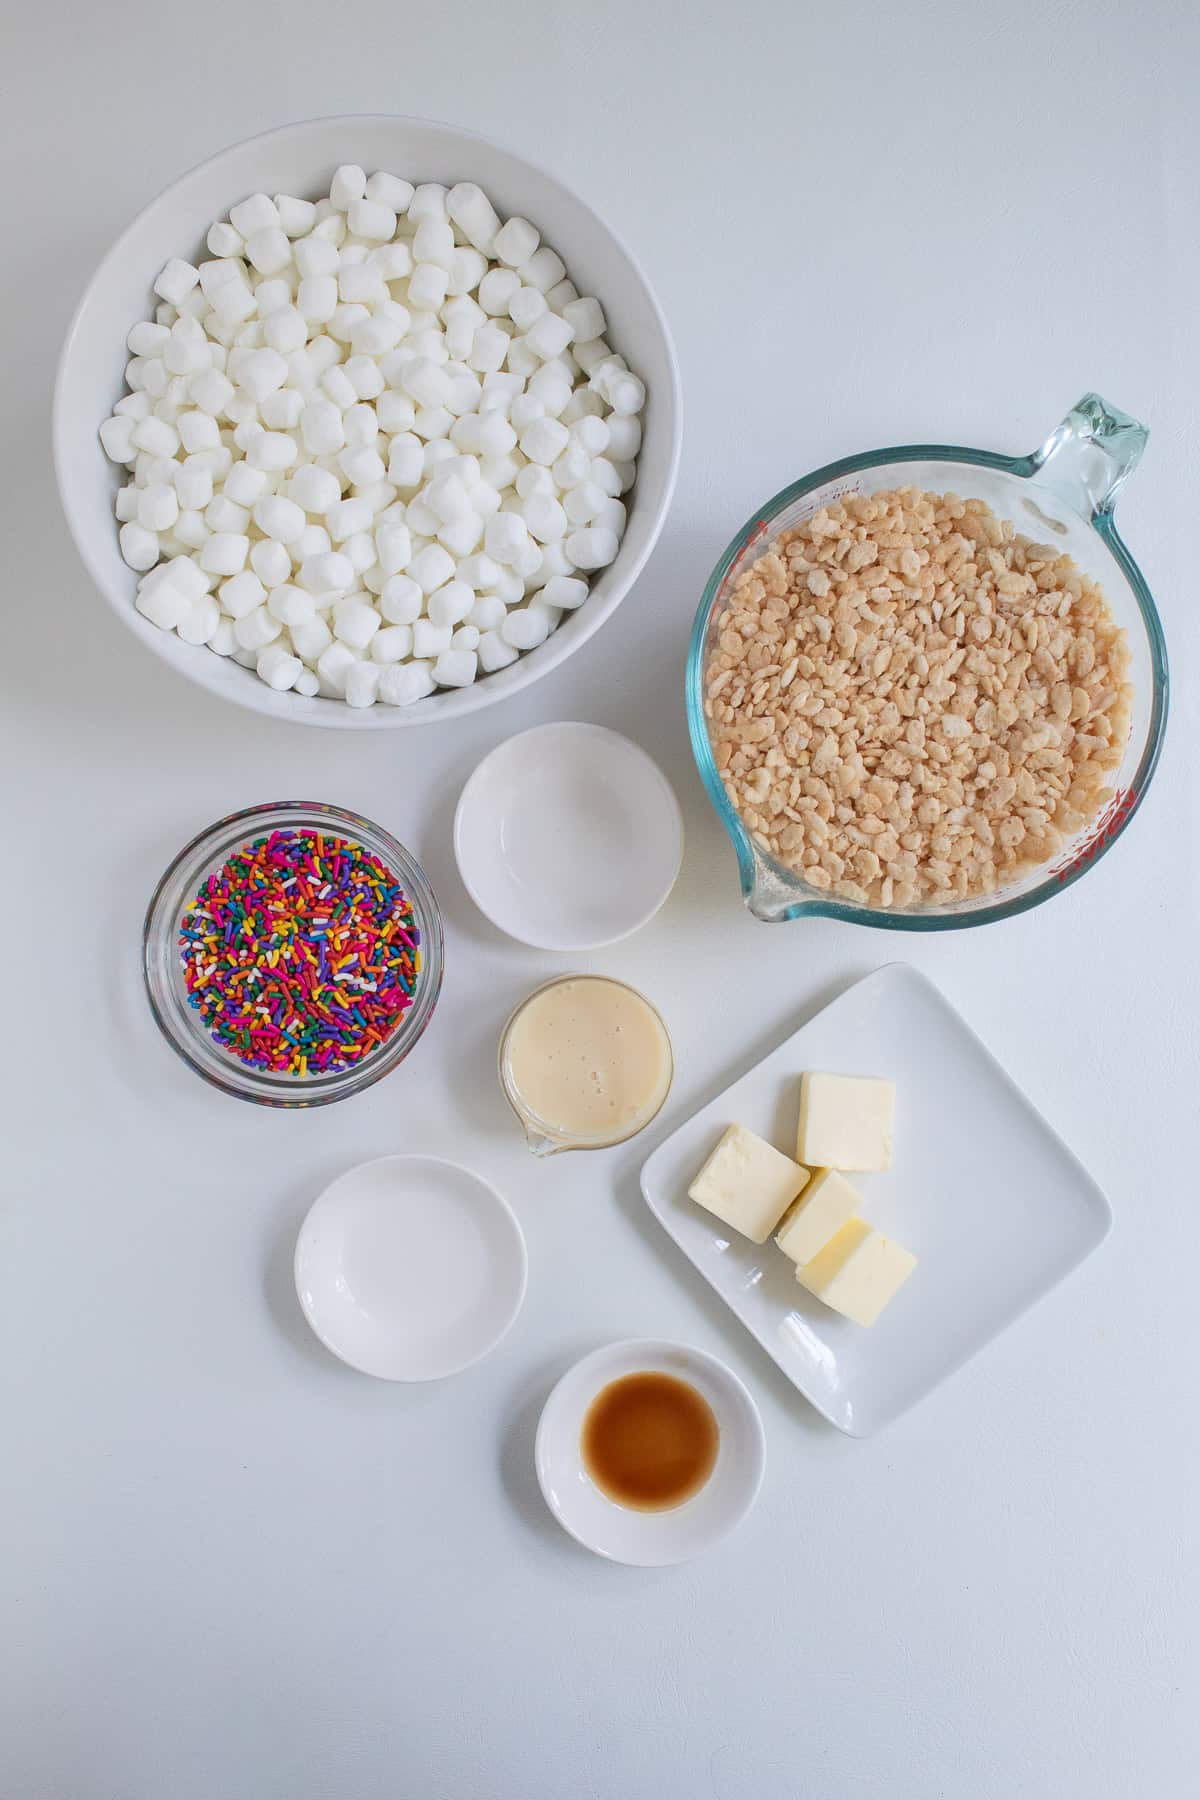 The ingredients for the treats are arranged on a white surface in various bowls and plates.